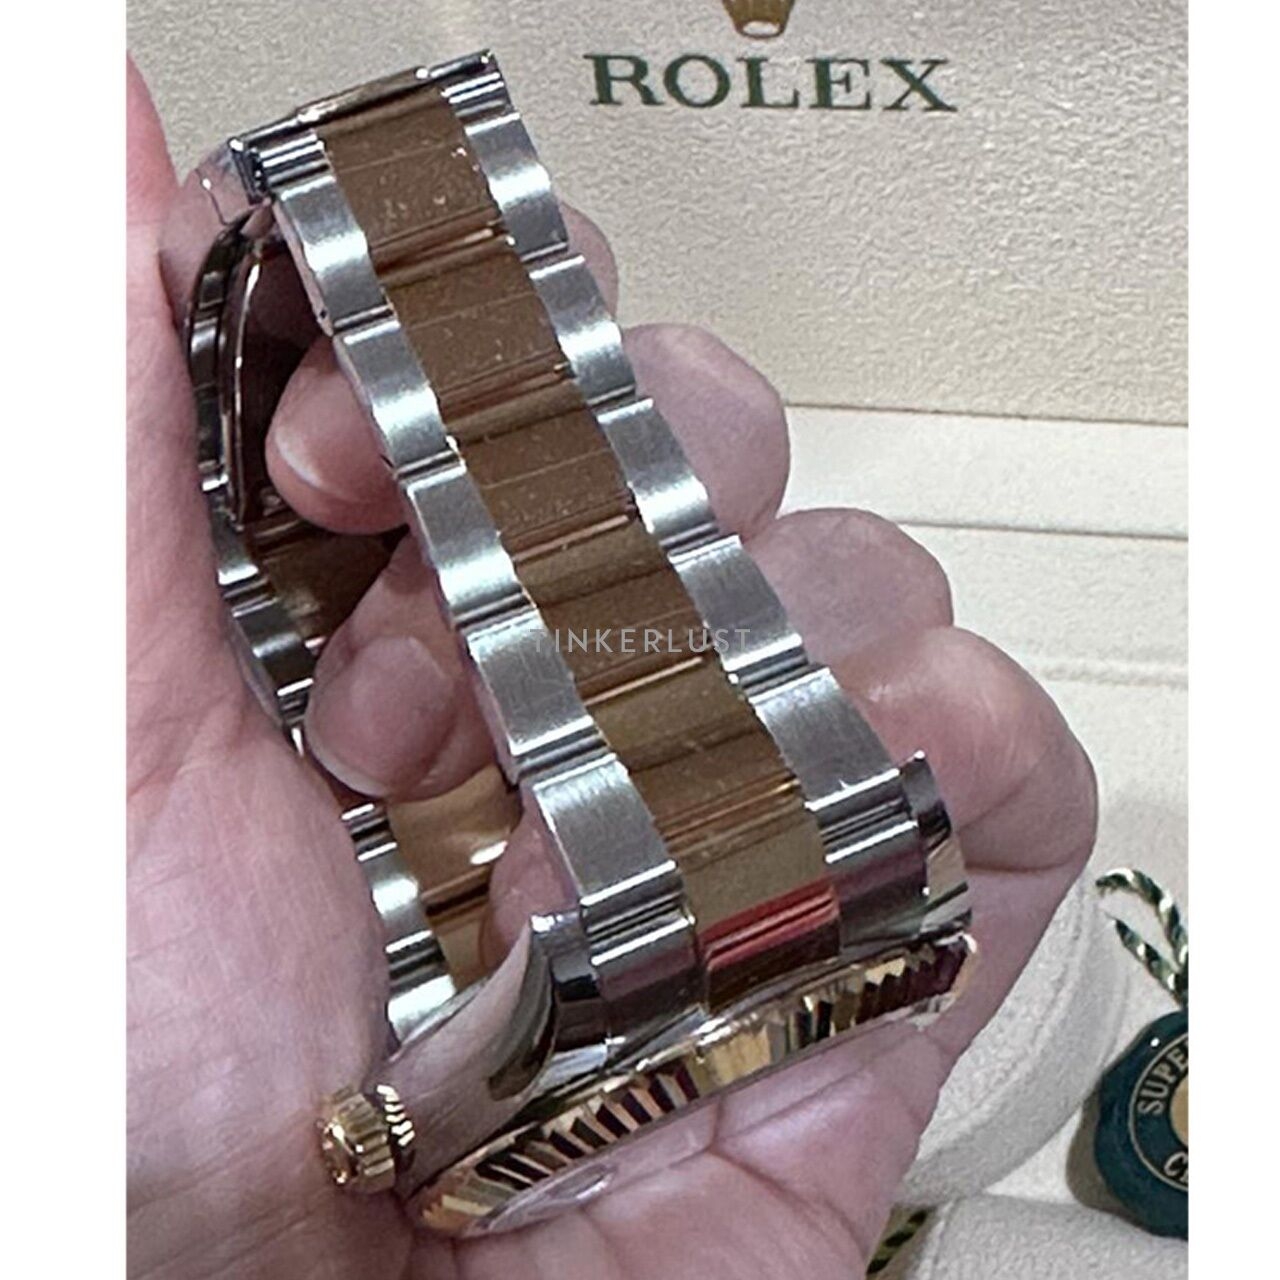 Rolex Sky-Dweller 42mm Stainless Steel & Yellow Gold Champagne Watch